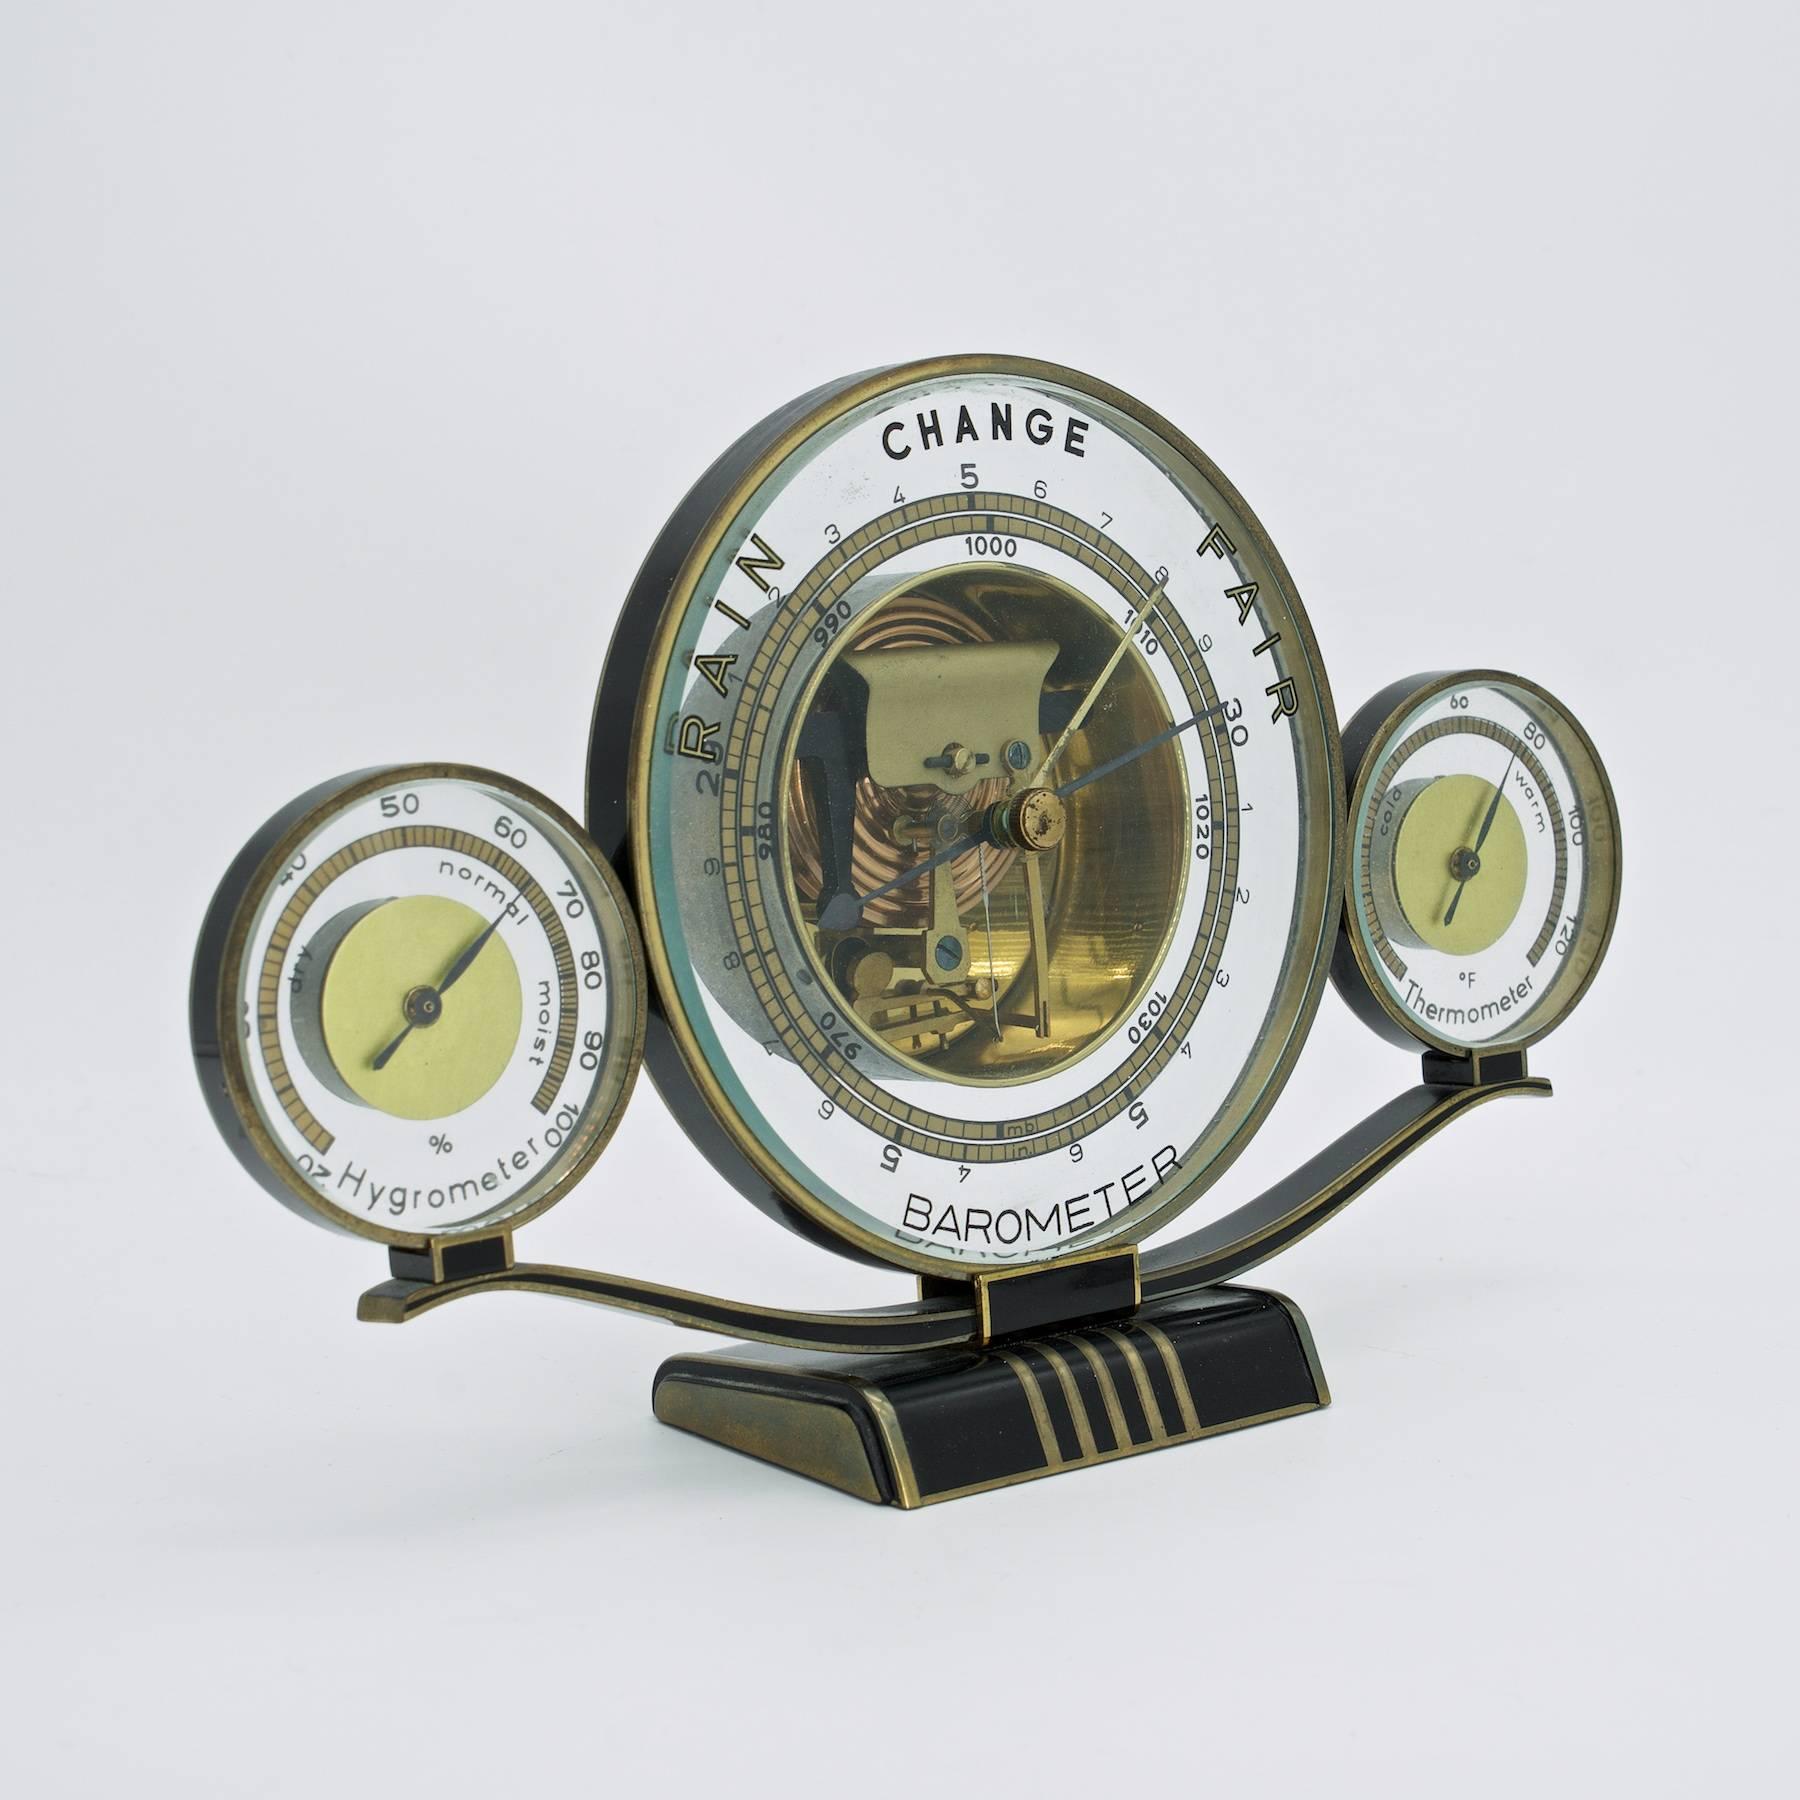 German aneroid barometer, hygrometer, and thermometer. Gold-plated trim and enamel. Wonderful condition free of damage. Rarely seen variation in English. 
Working, was tested 10/12/19 outside on porch, and readings were in line with internet